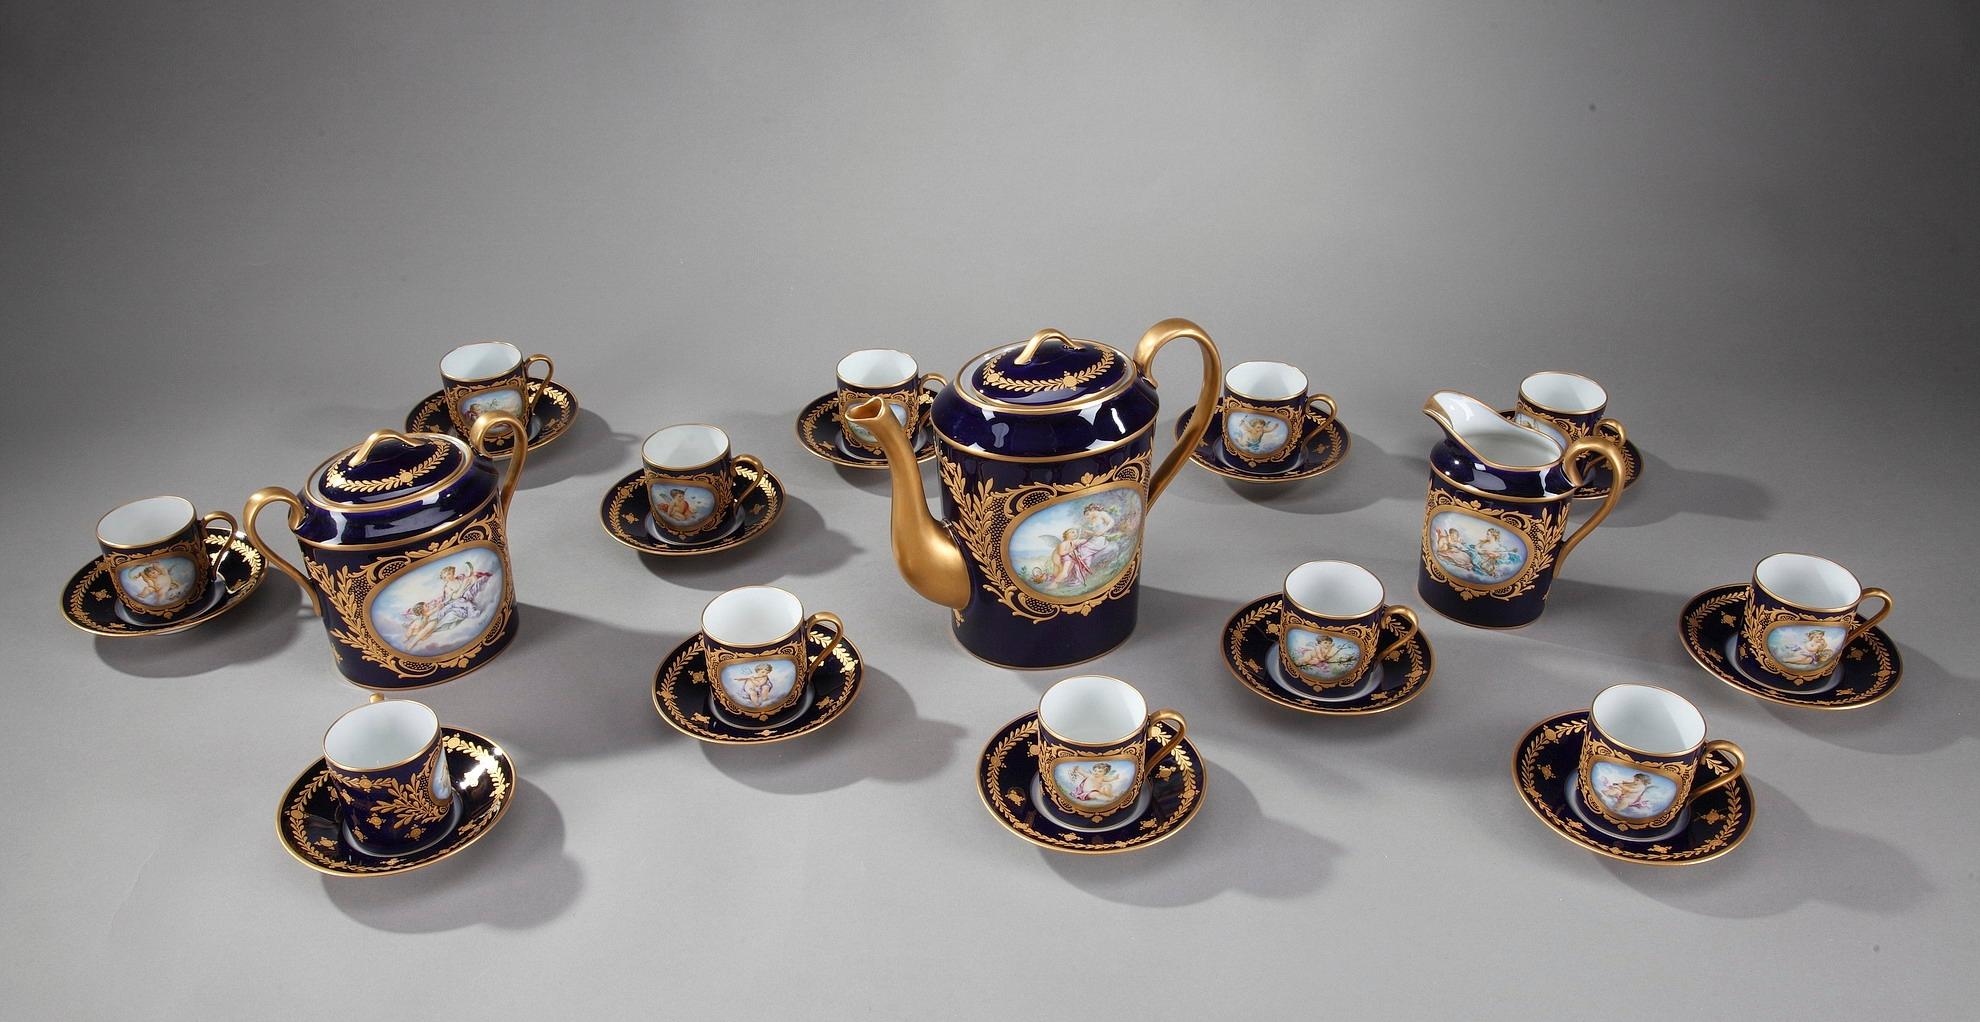 19th century antique china coffee service in Sevres taste. It comprises: a coffeepot, a milkpot, a sugar bowl and 12 cups with saucers. Each of the 27 exquisite pieces displays delicately hand painted cartouches of mythological characters within